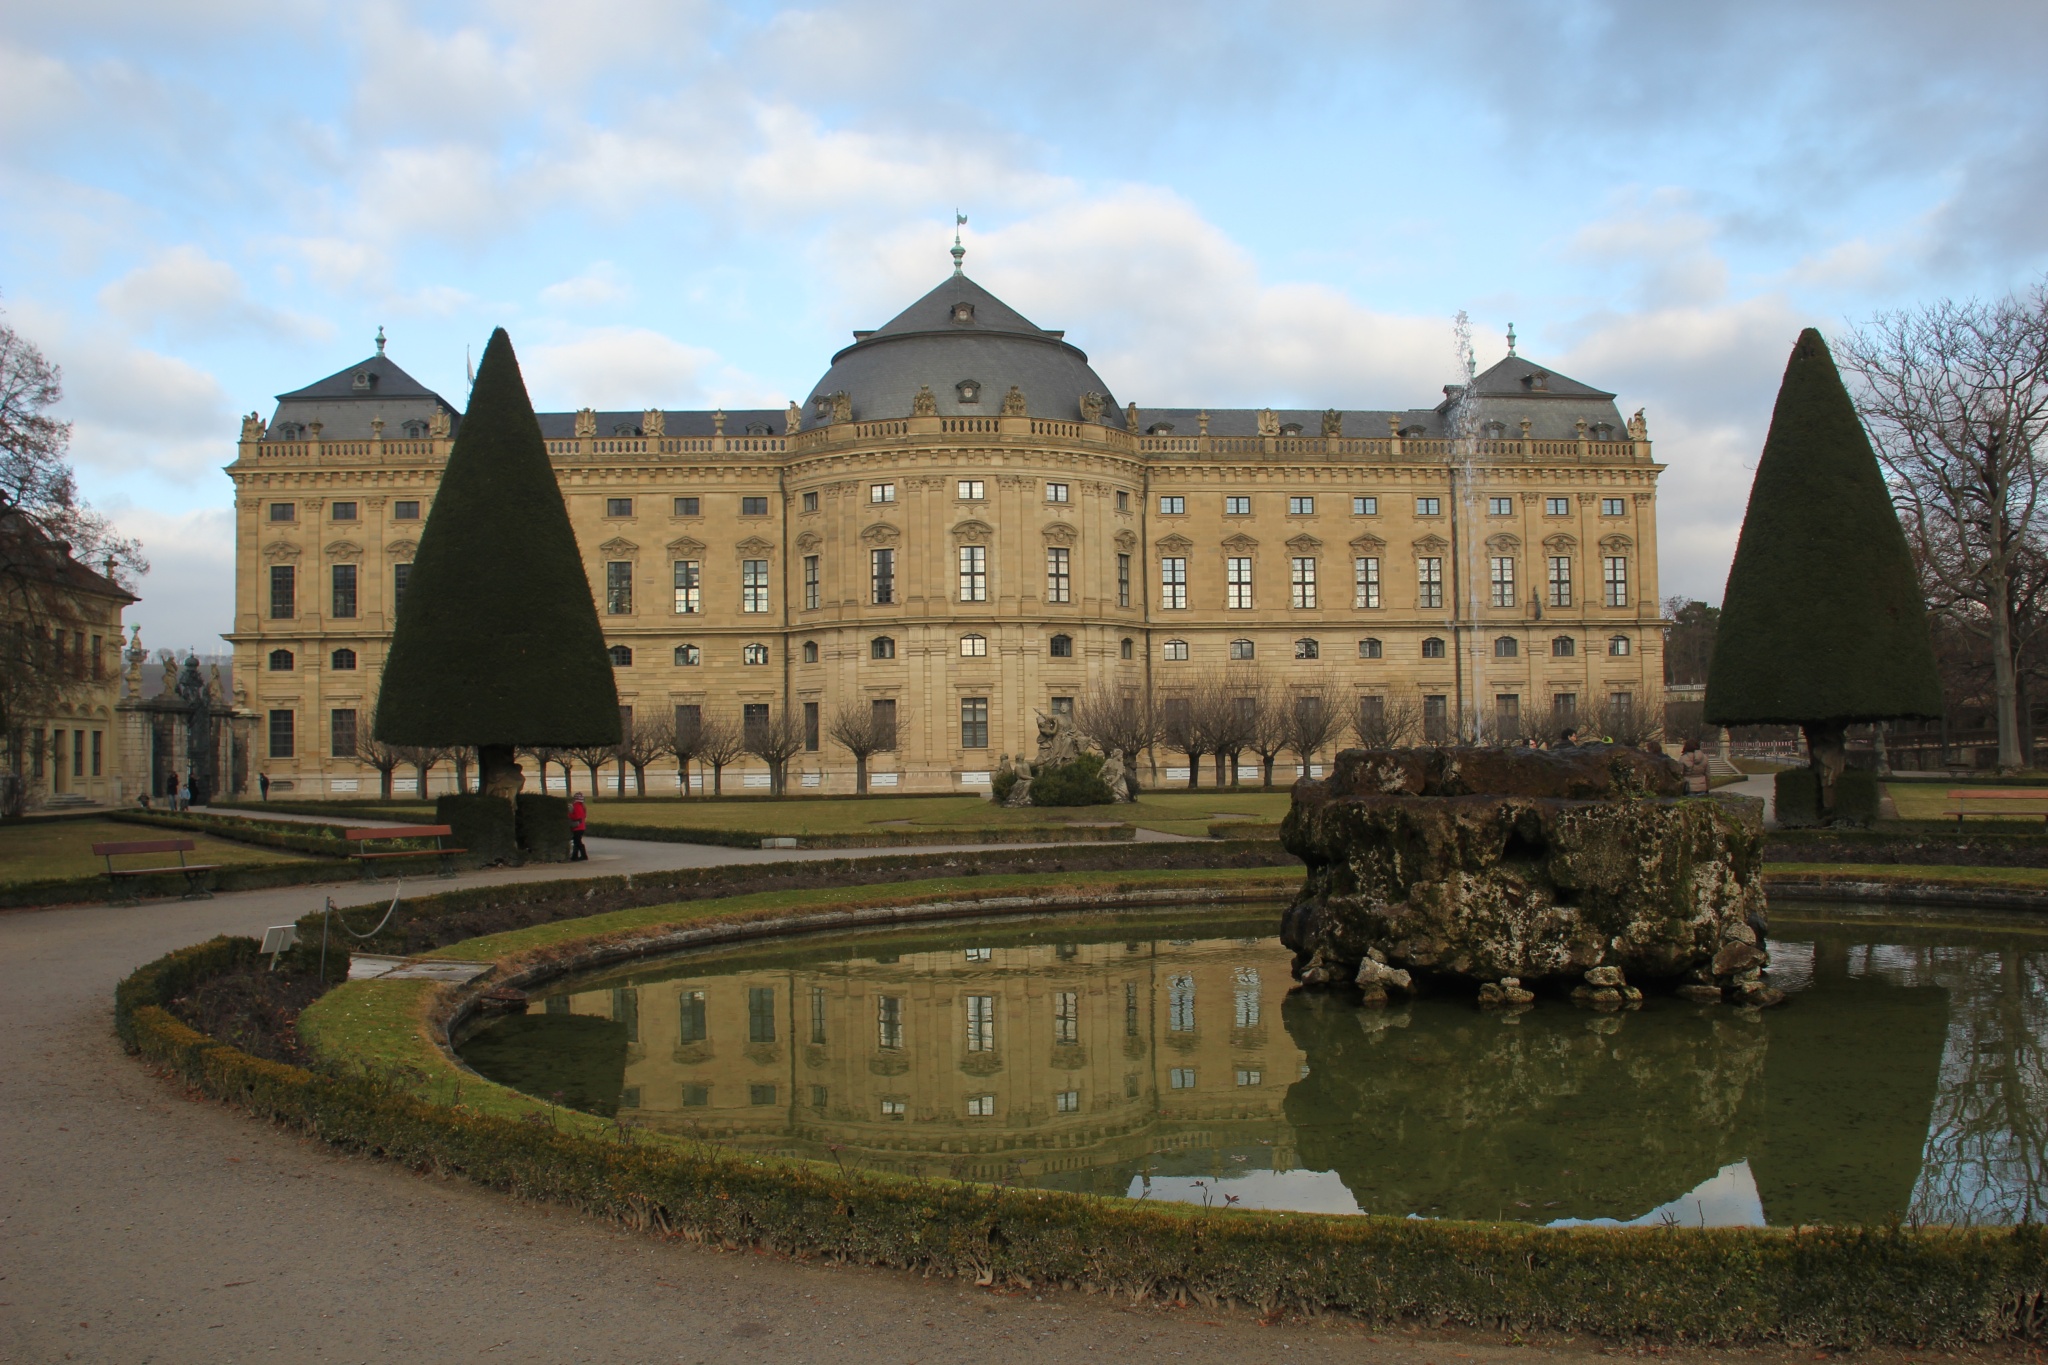 The Würzburg Residence in Würzburg, Germany is a UNESCO World Heritage Site.